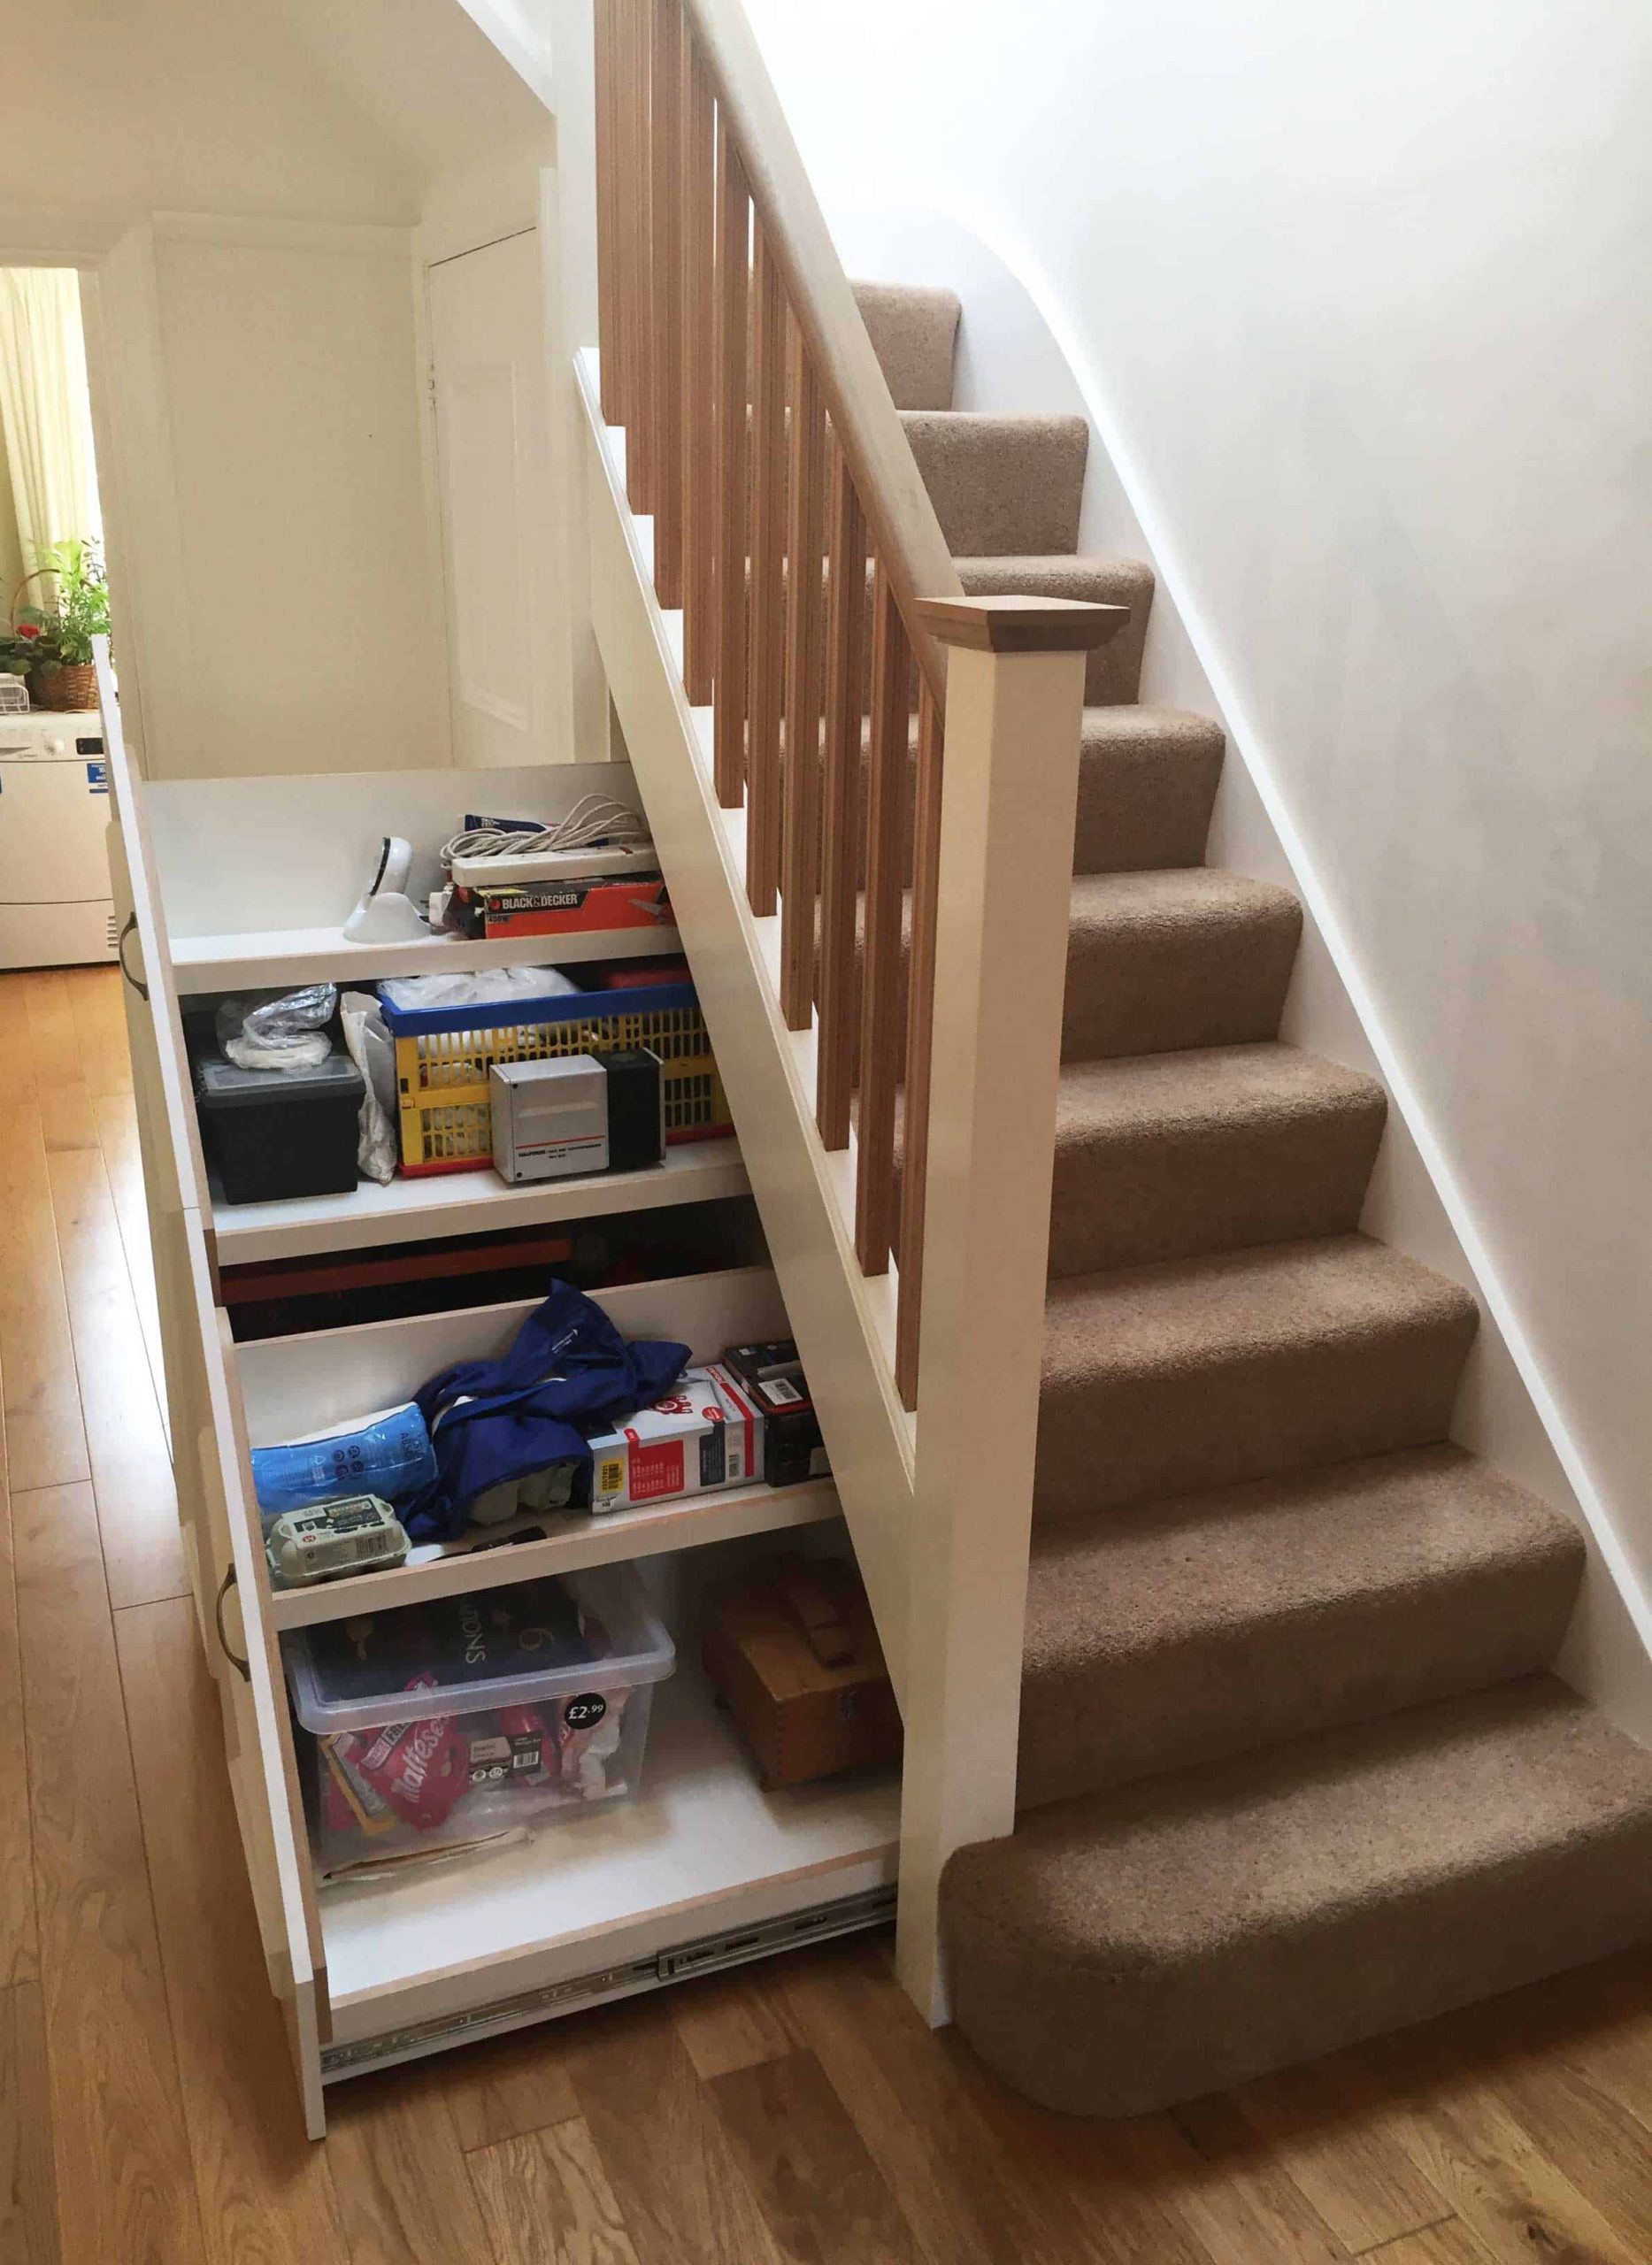 11 Clever Storage for Under the Stairs Ideas and Inspiration - Melanie Jade  Design